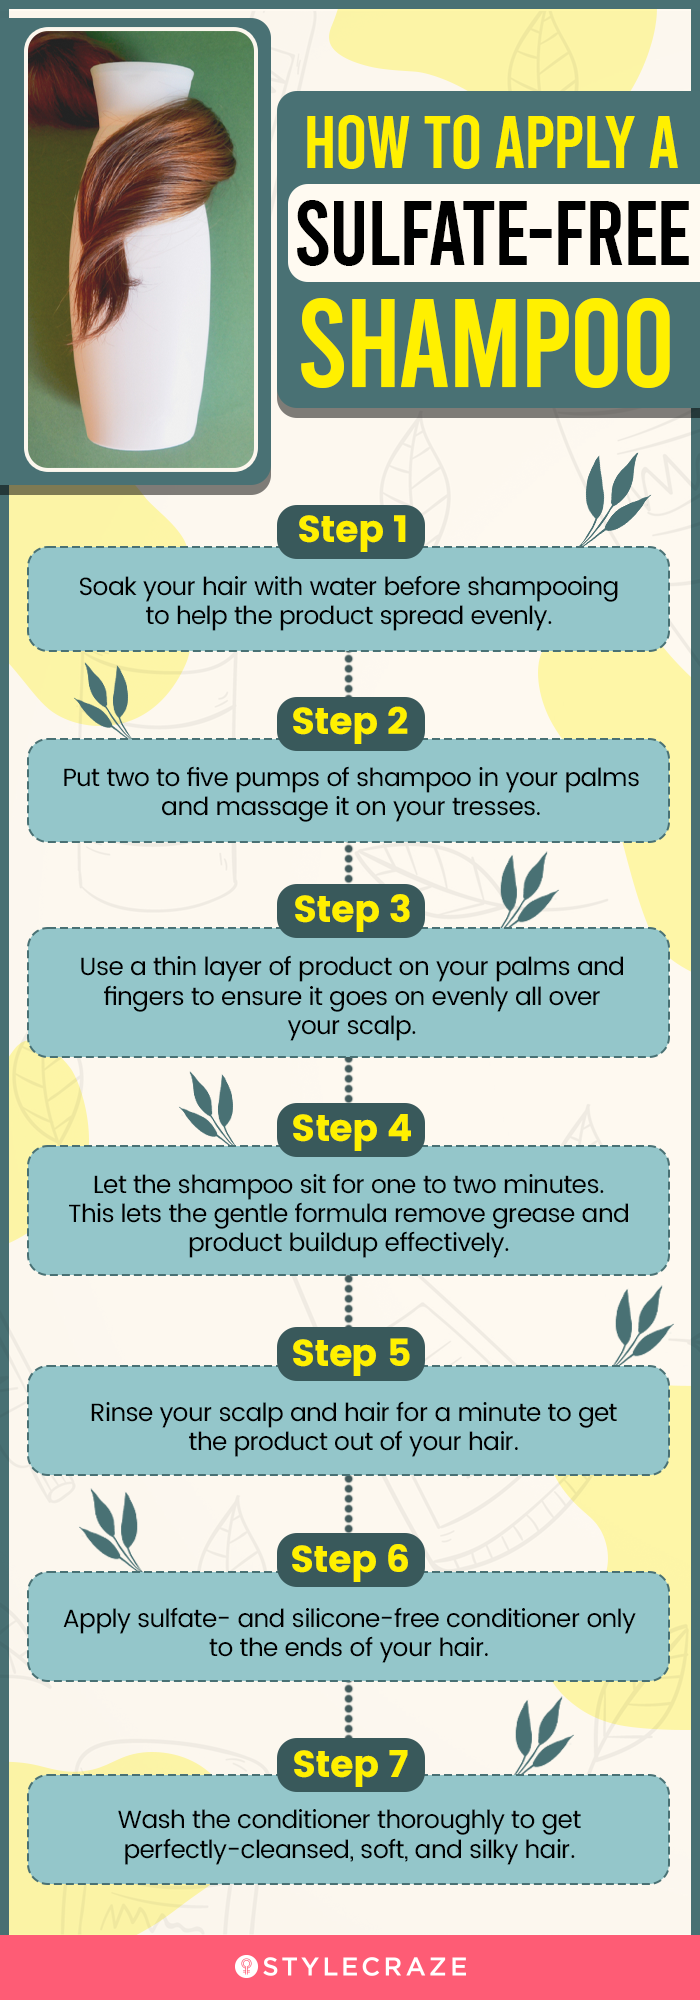 How To Apply A Sulfate-Free Shampoo (infographic)